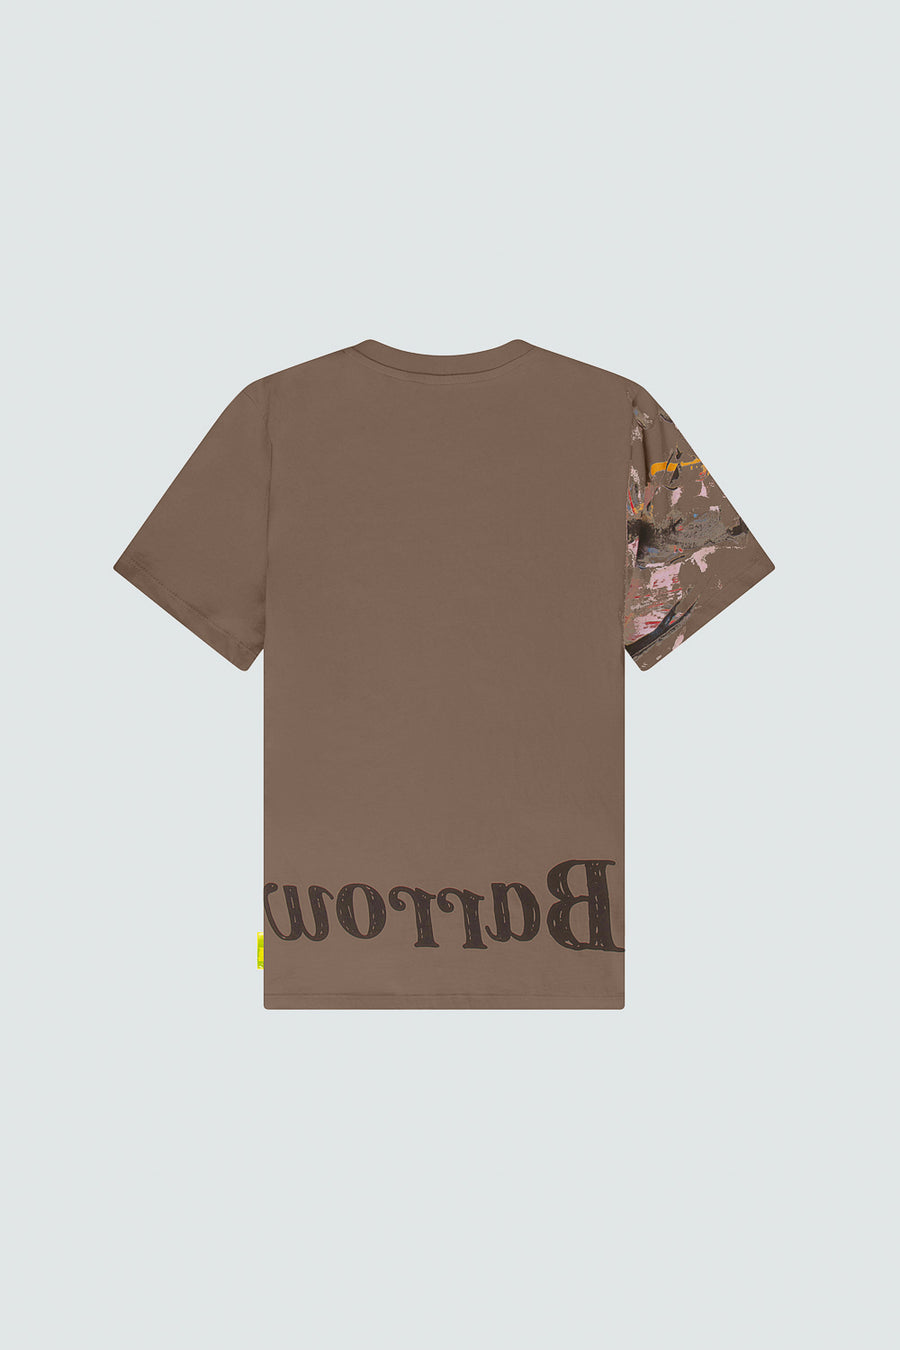 Buy the Barrow Painted Logo T-Shirt in Camel at Intro. Spend £50 for free UK delivery. Official stockists. We ship worldwide.